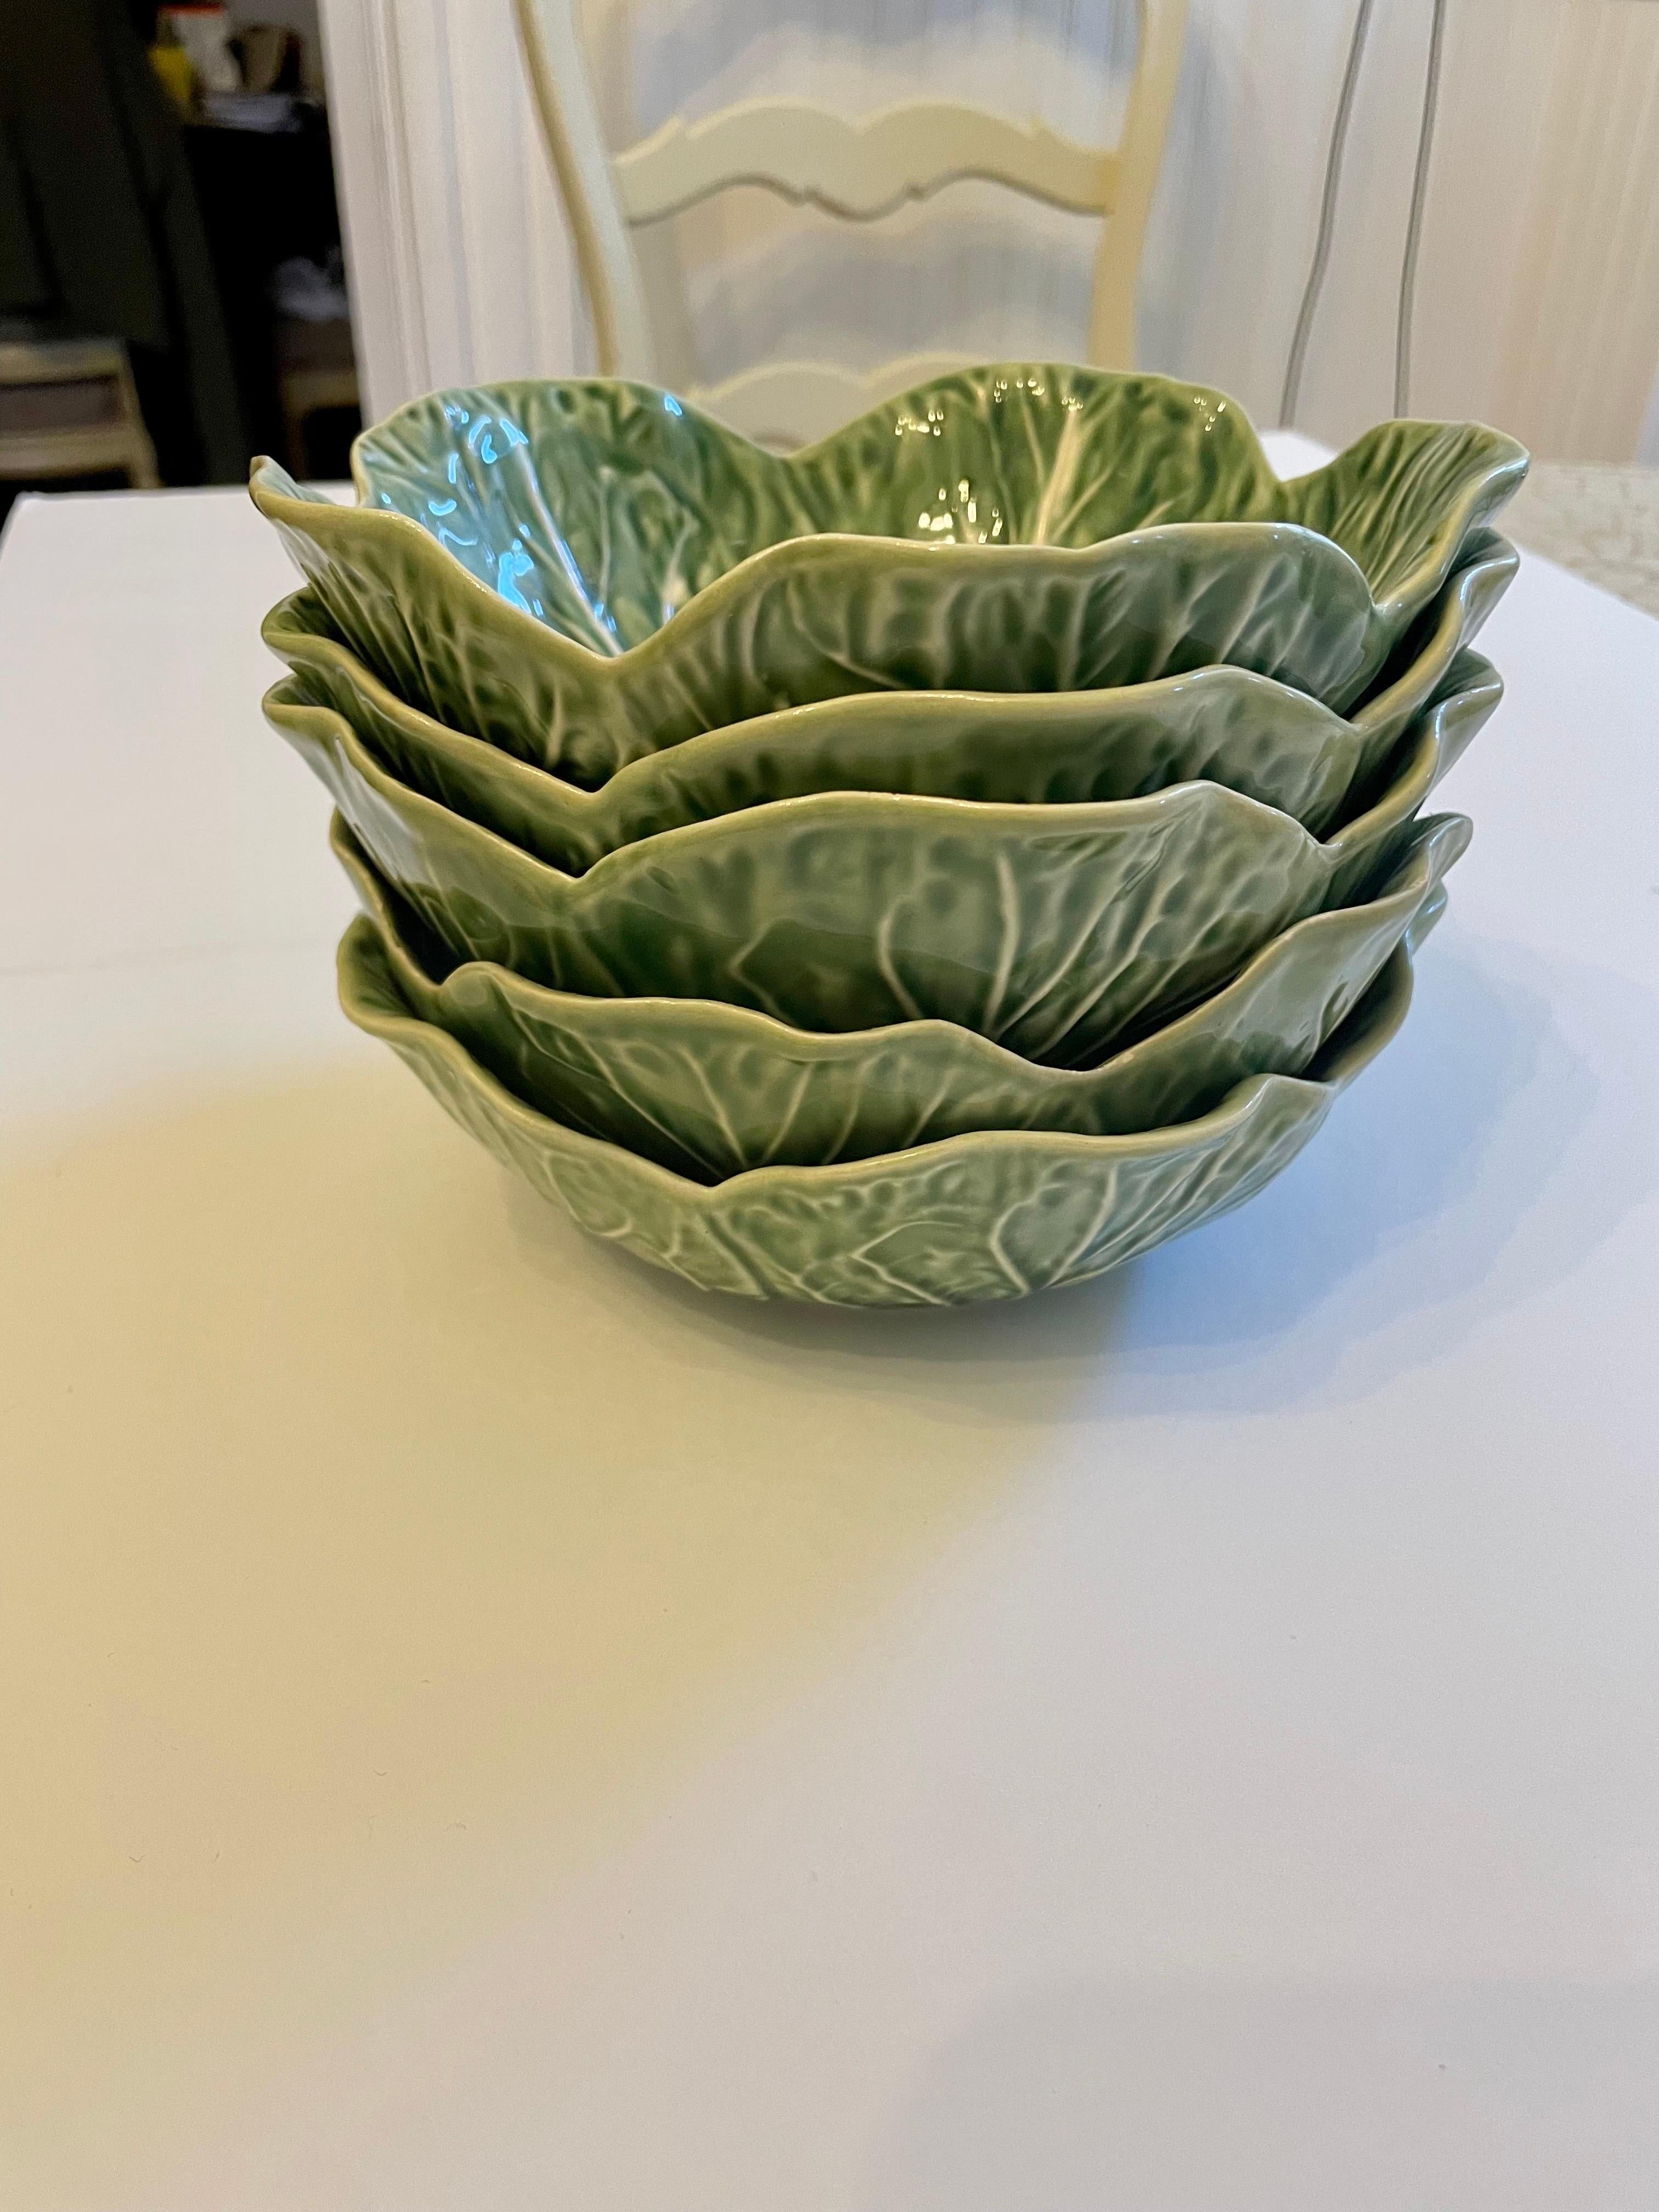  Set Of Five Cabbage Pattern Bowls by Bordallo Pinheiro, Portugal 1